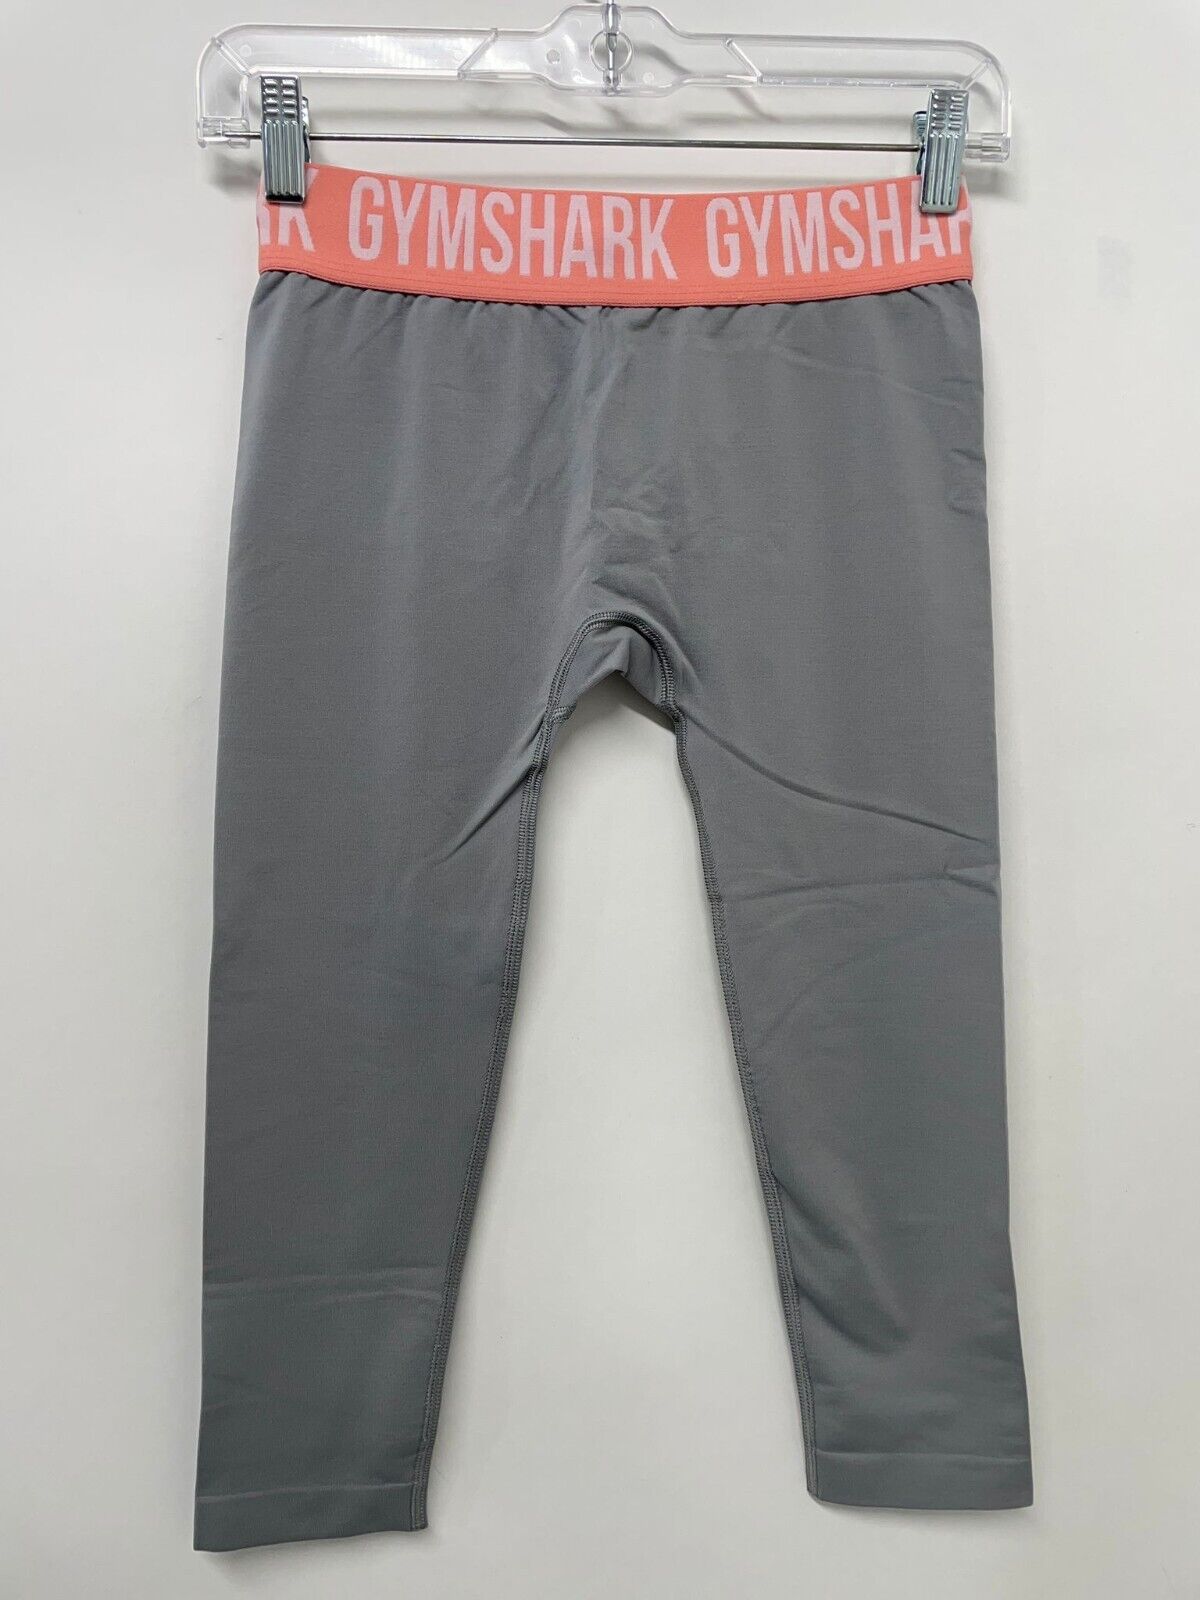 Gymshark Womens S Fit Seamless Cropped Legging Banded Gym Athletic Smoky Gray